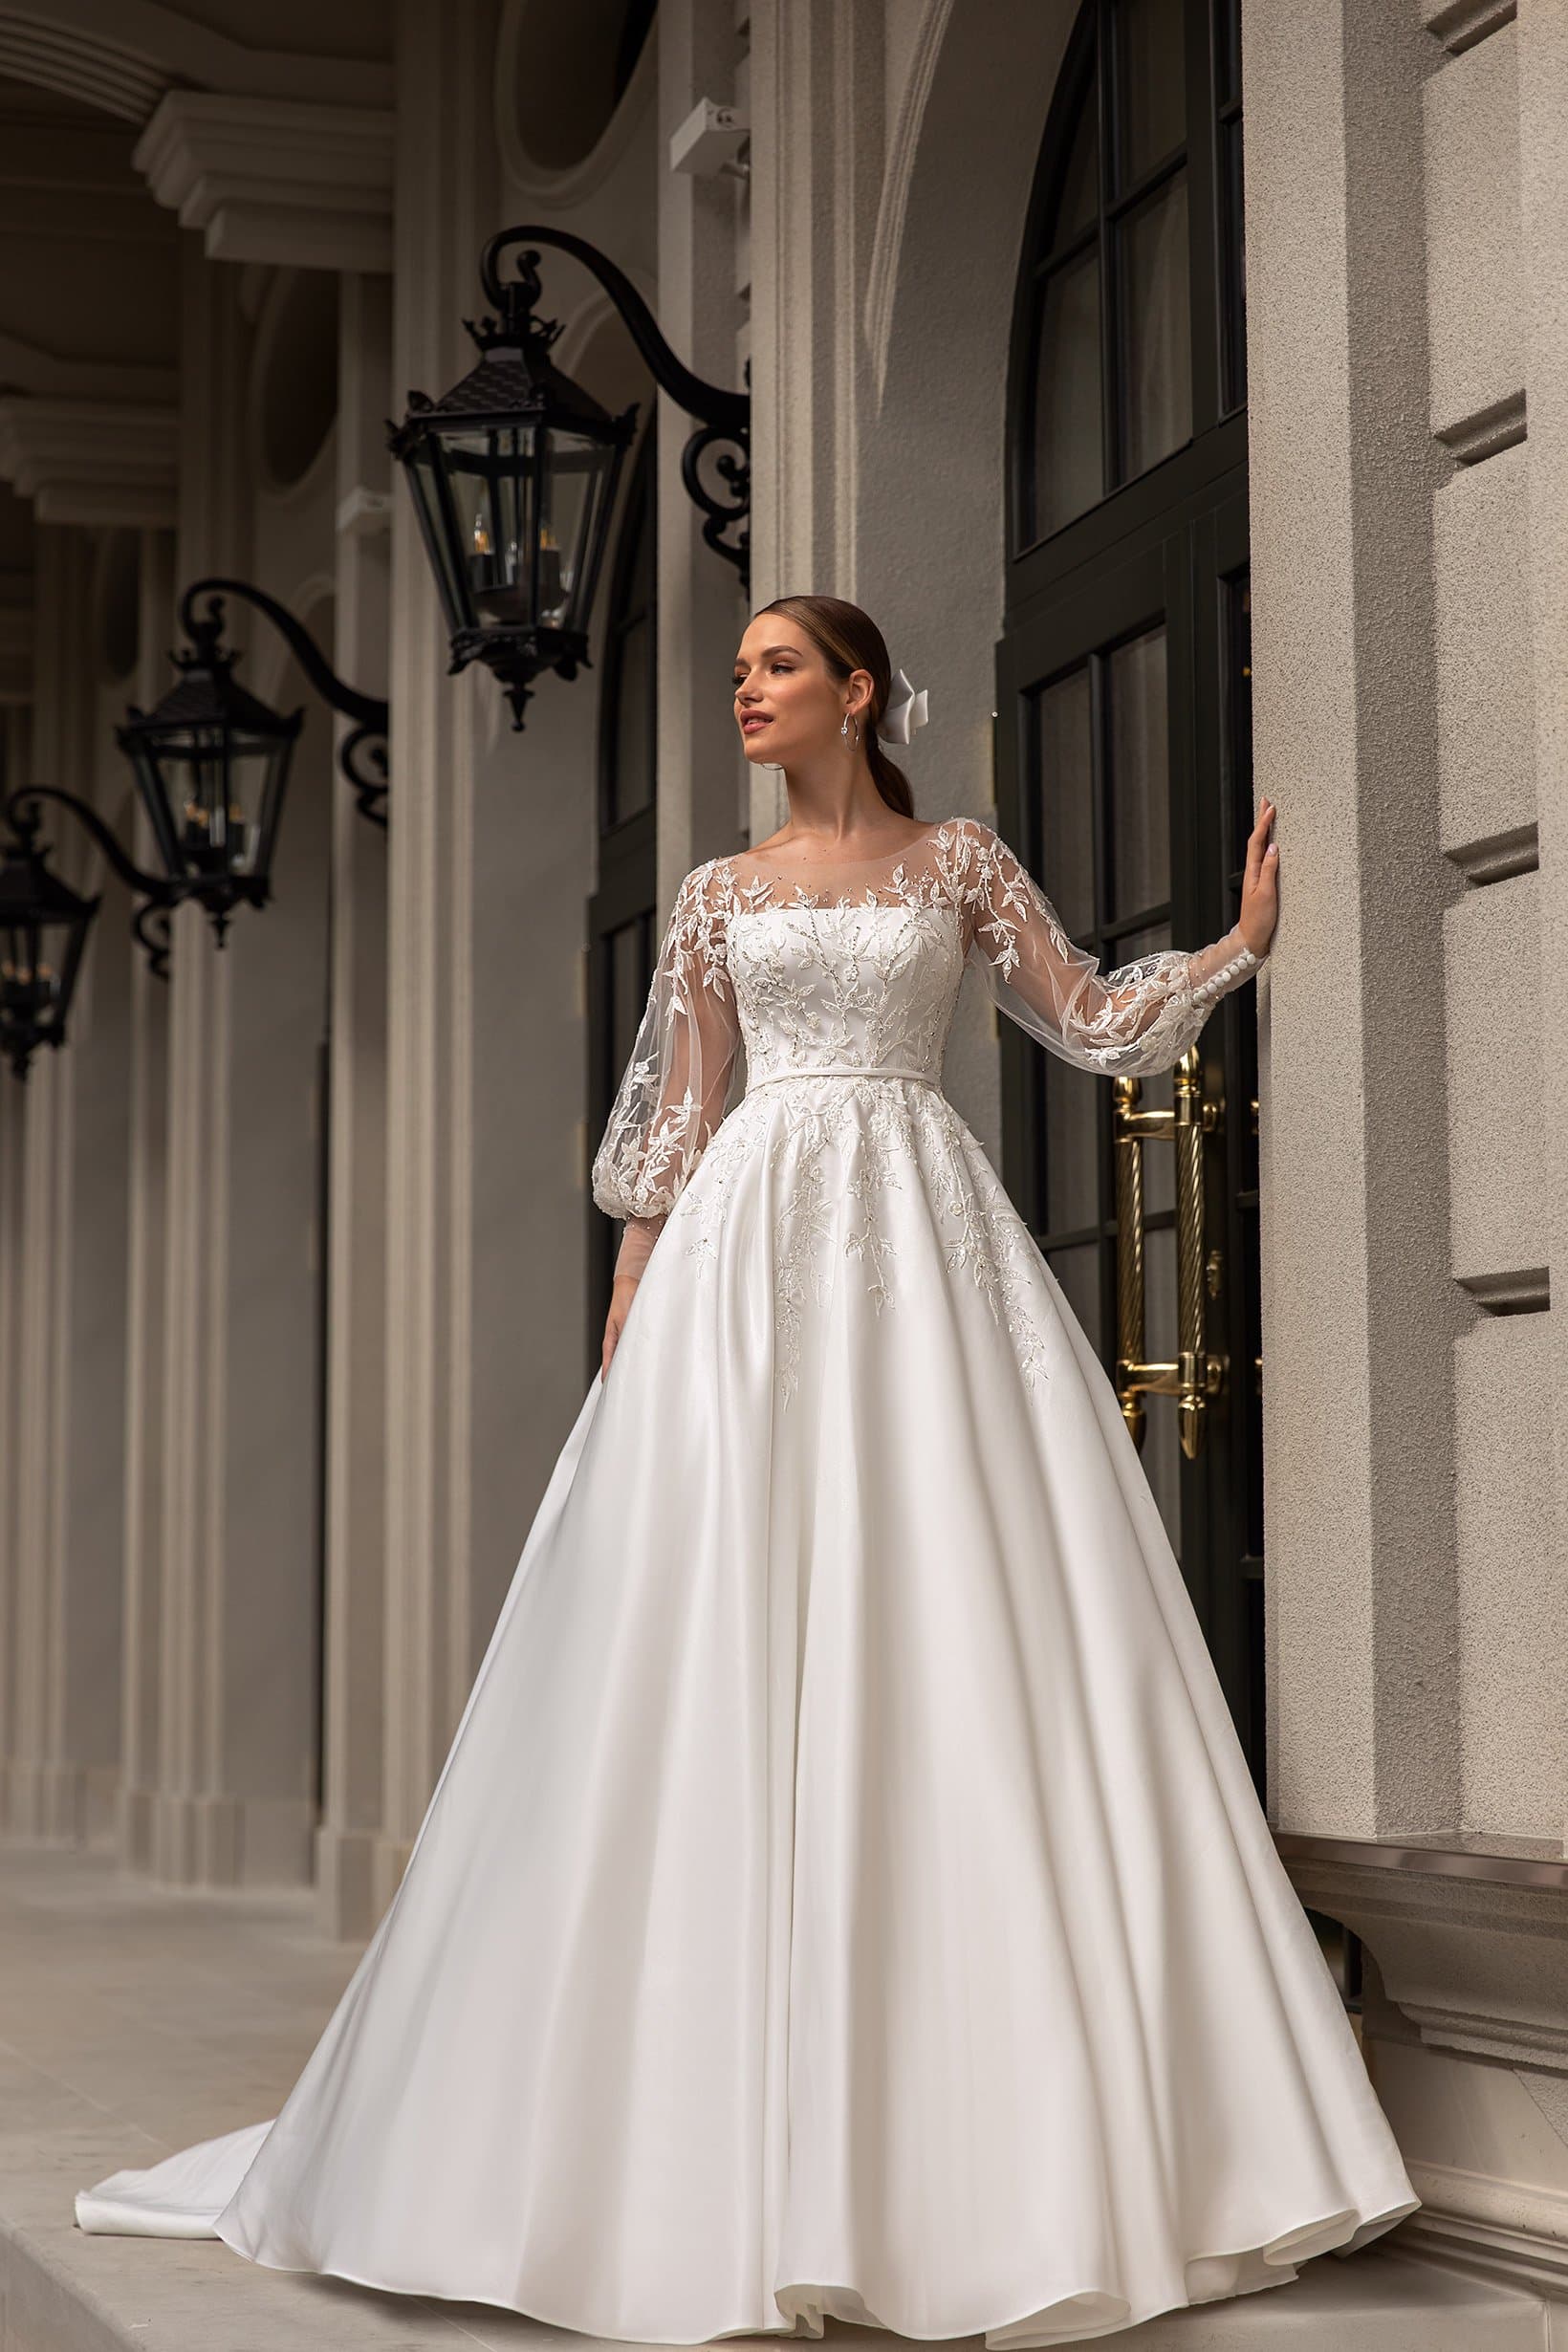 Wedding dress 5329 Product for Sale at NY City Bride